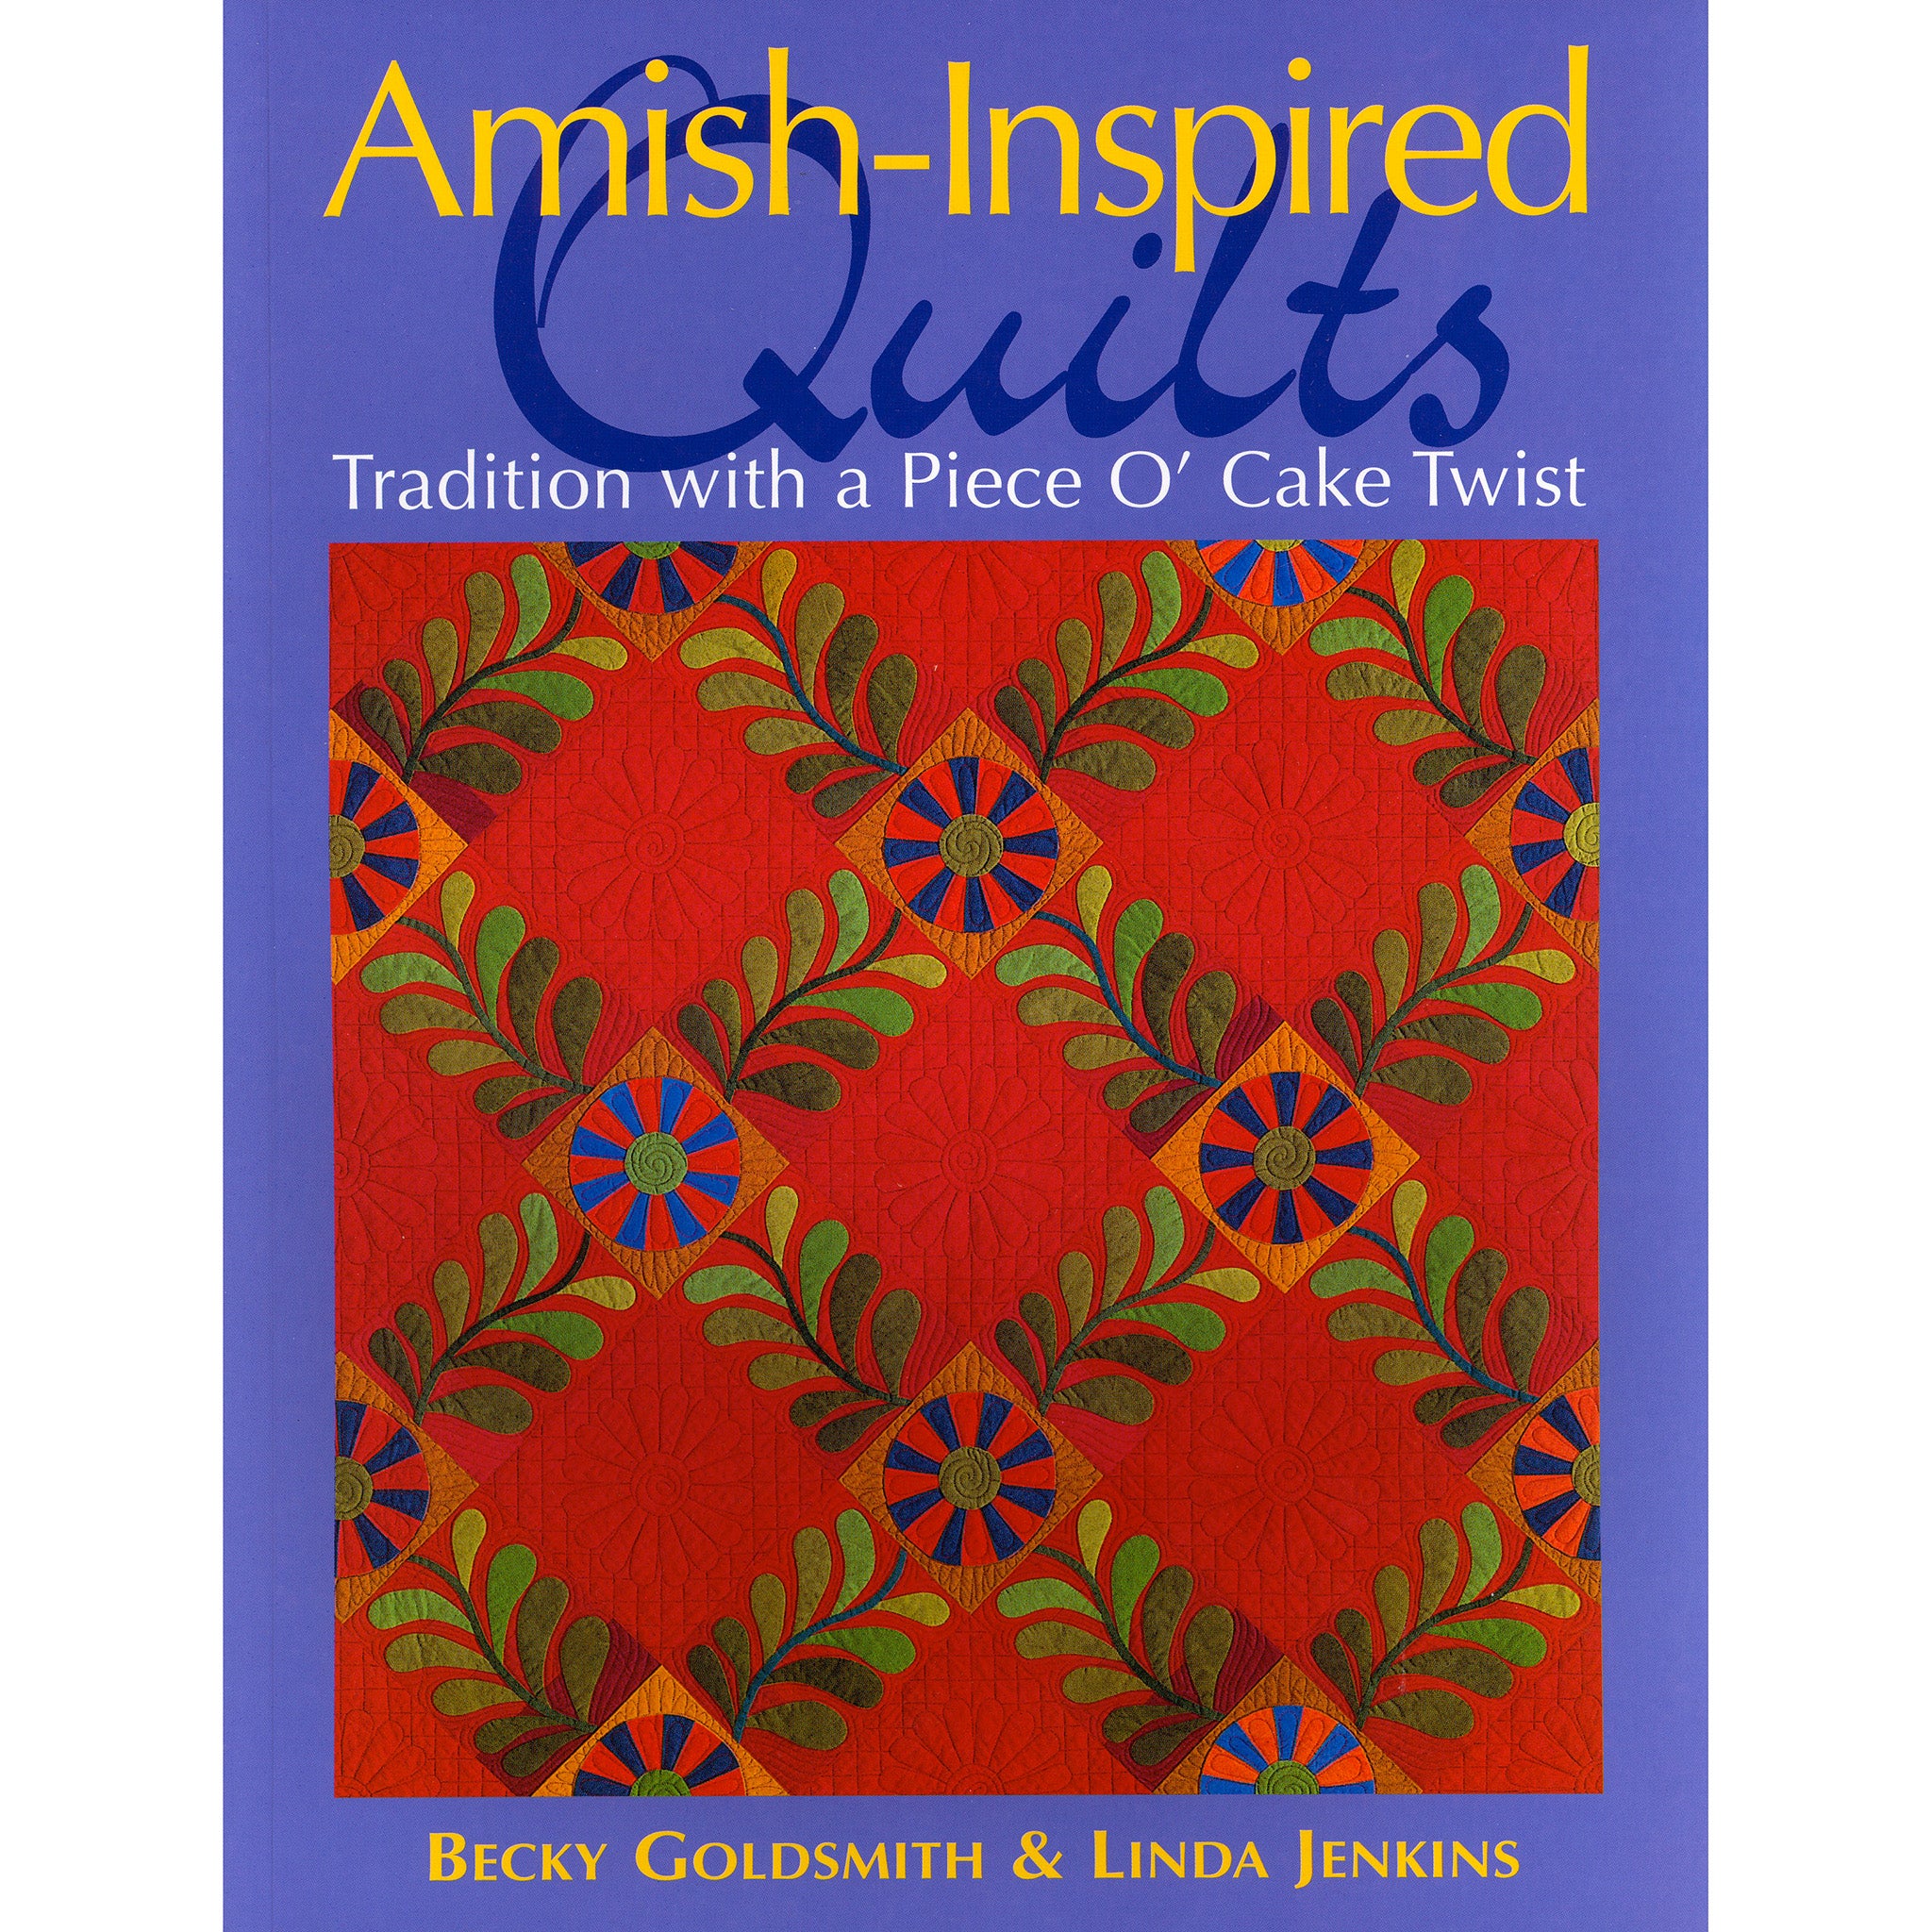 Amish-Inspired Quilts Digital Download eBook